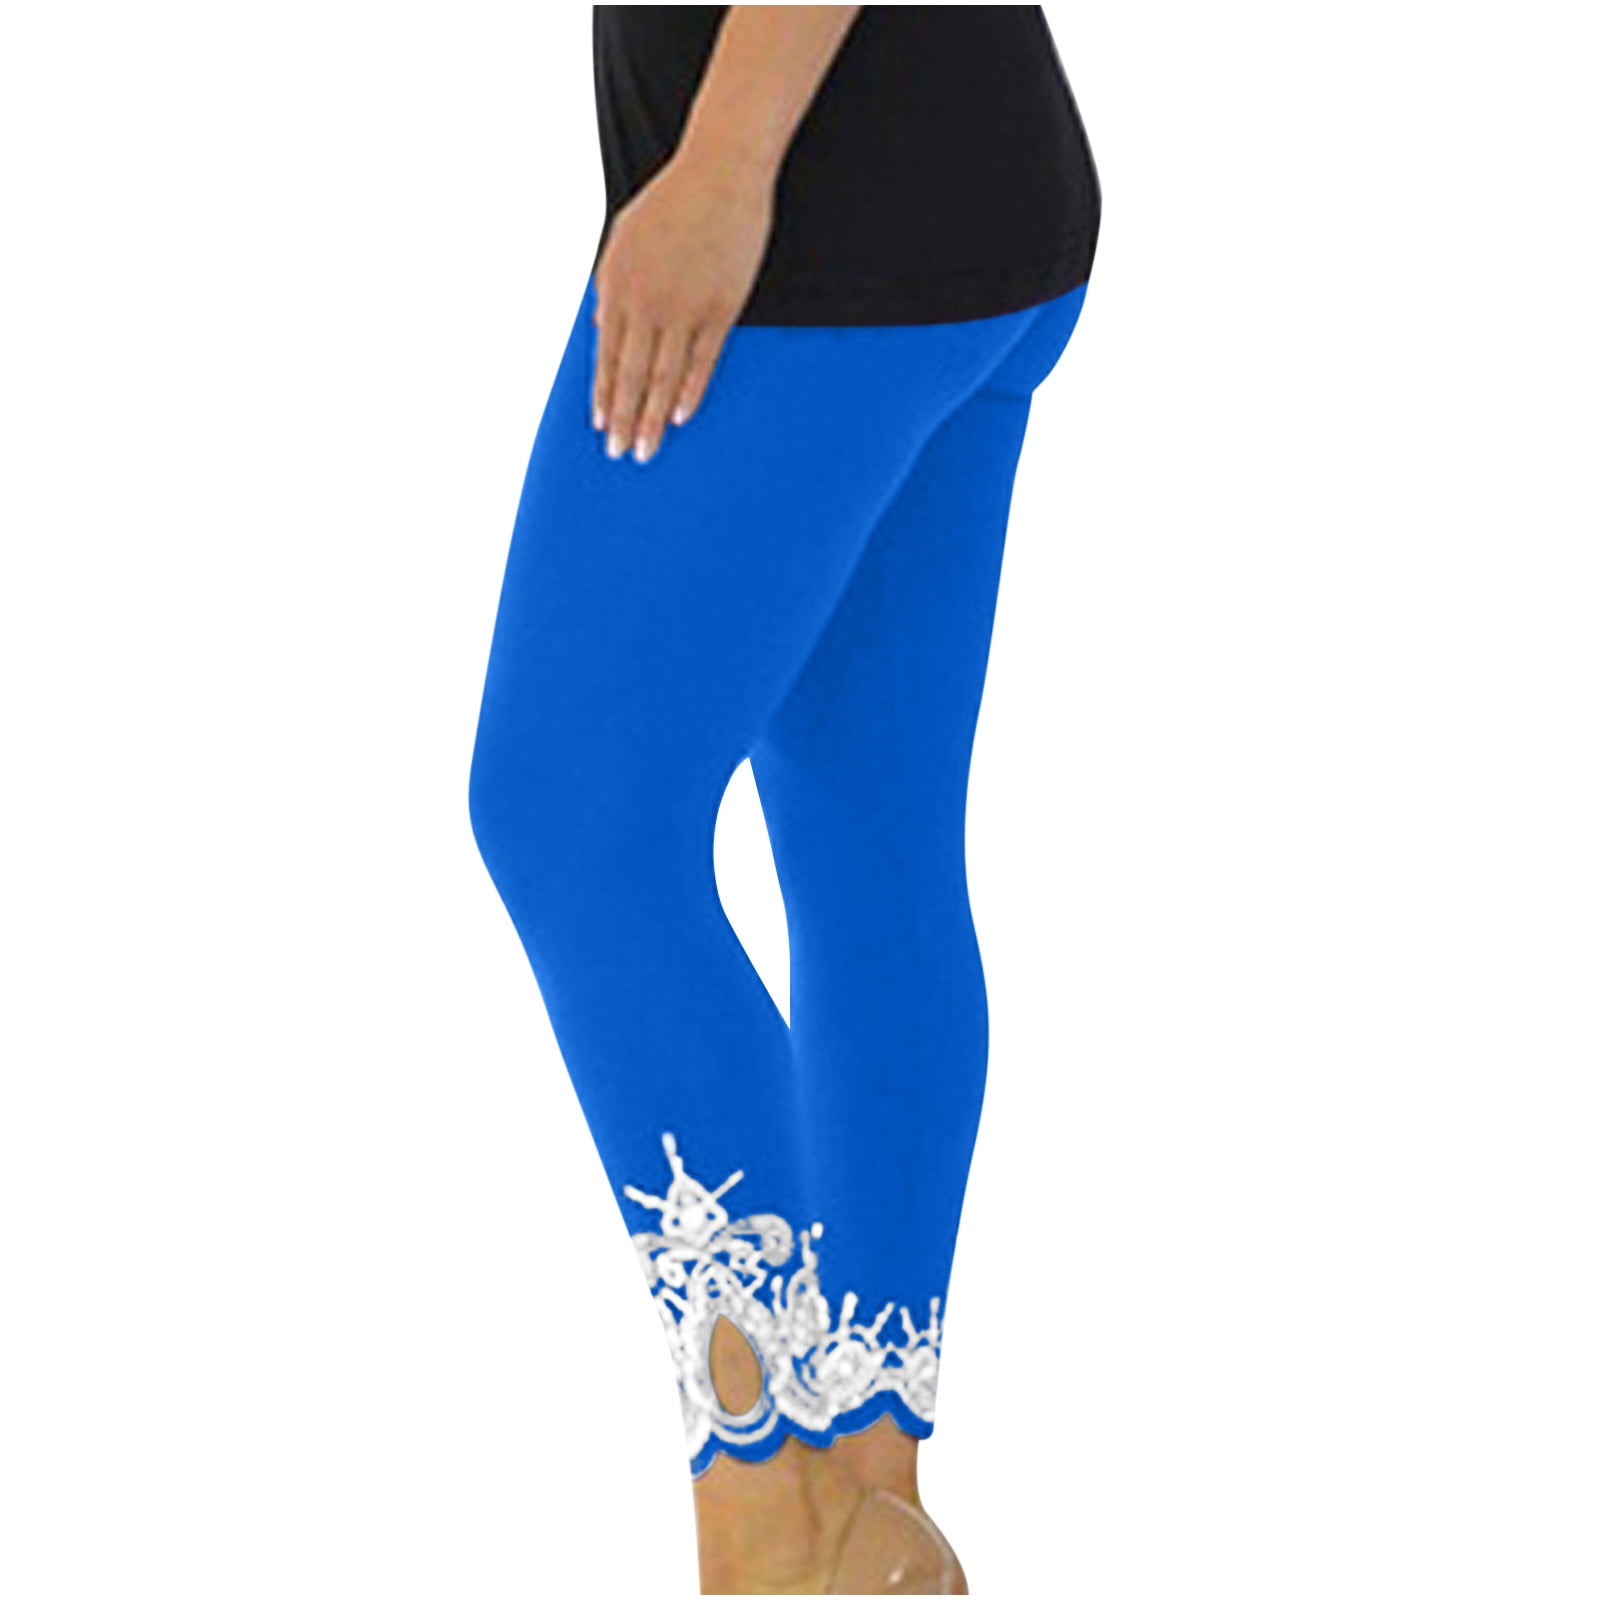 Reduced Price Womens Clothing ! BVnarty Leggings for Women Fashion